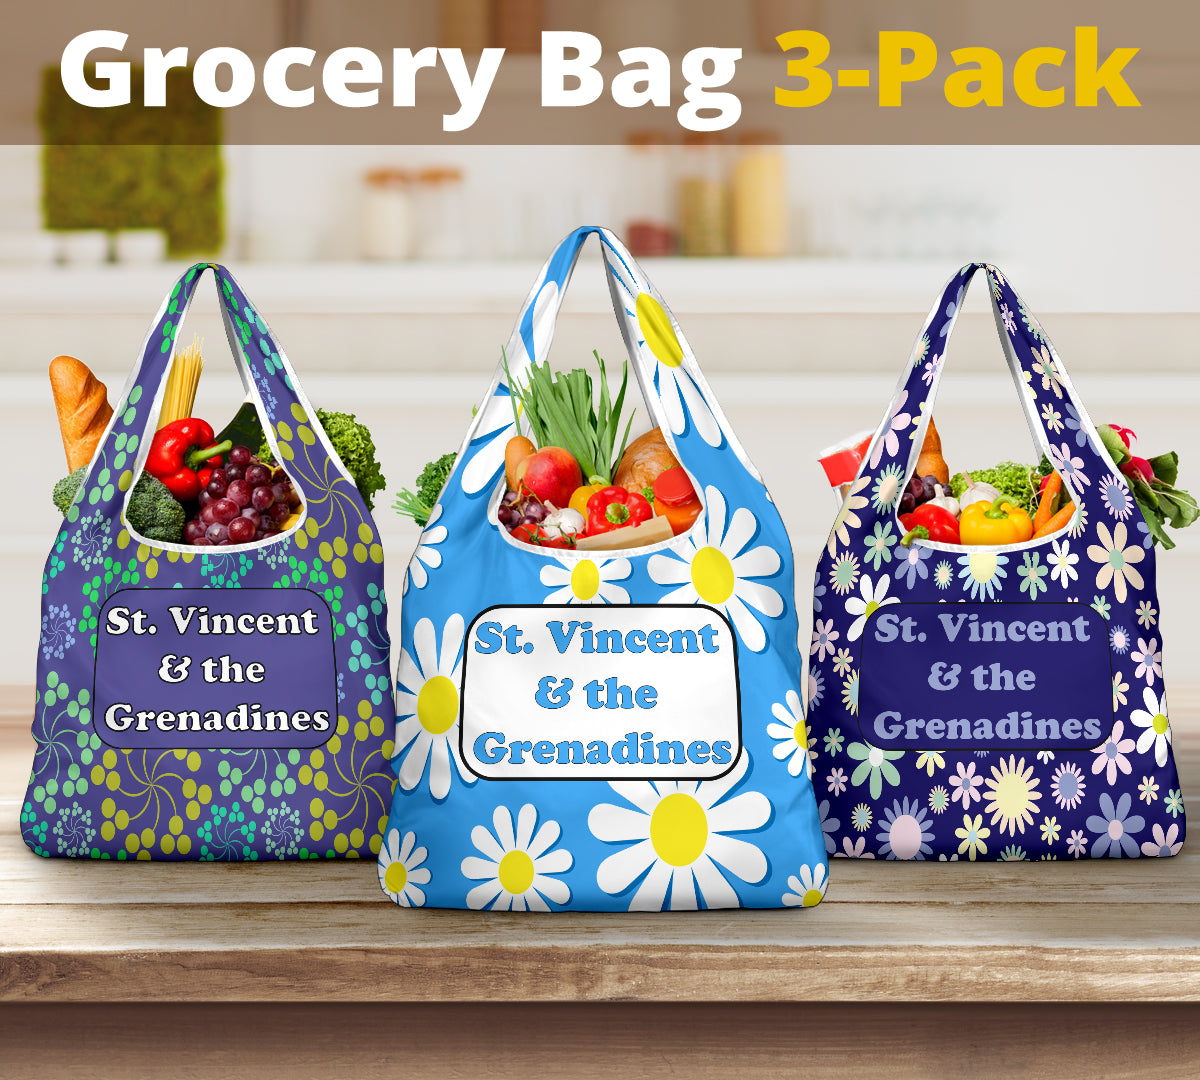 3 pack of reusable cloth St. Vincent and the Grenadines grocery bags with floral designs 